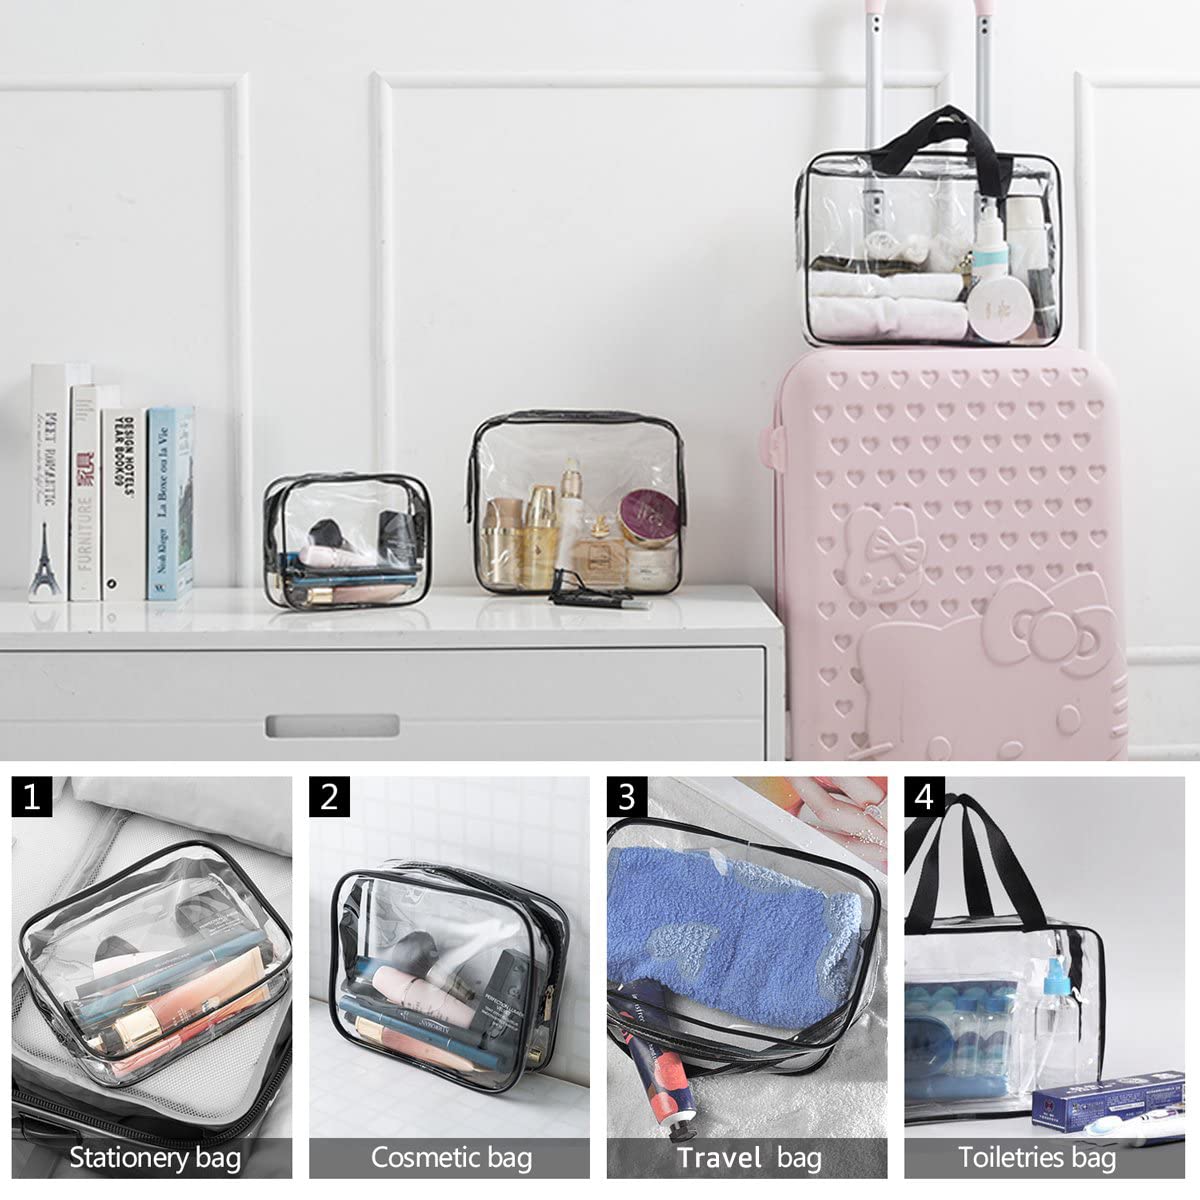 3Pcs Crystal Clear PVC Travel Toiletry Bag Kit for Women Men, Waterproof Vinyl Organizer Makeup Bags with Zipper Handle Straps, Cosmetic Bag Pouch Carry on Airport Airline Compliant Bag Handbag